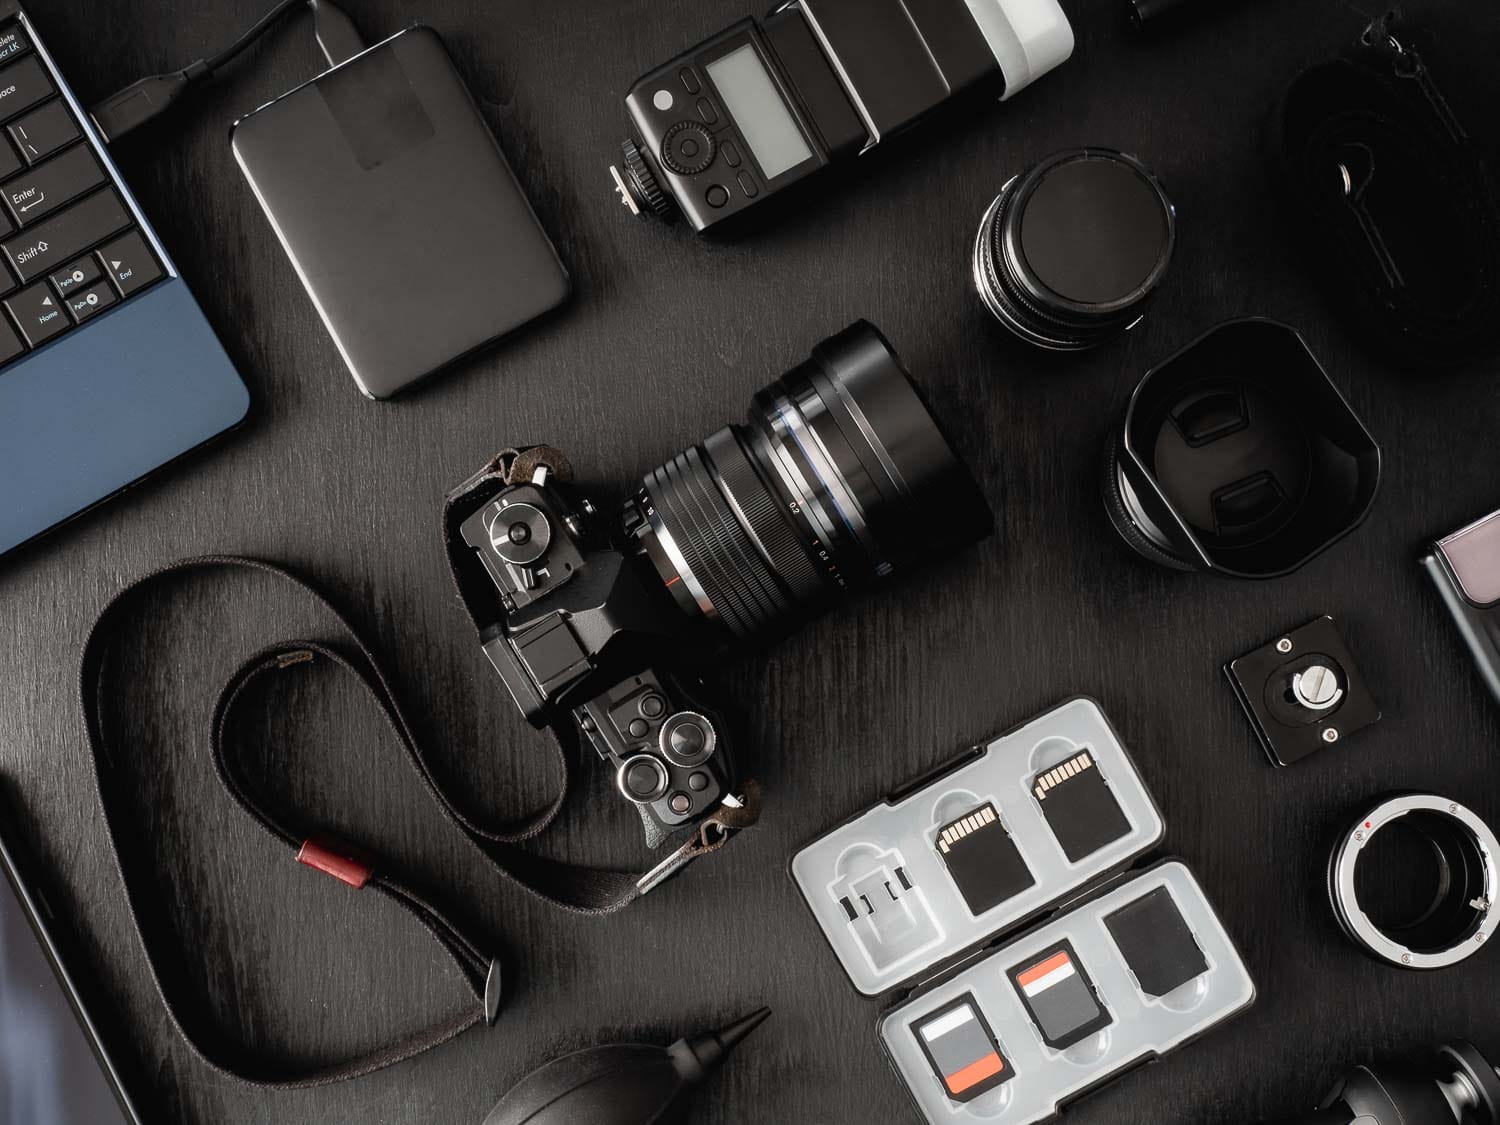 Assorted photography equipment arranged on a dark surface, including a camera, lenses, and memory cards.